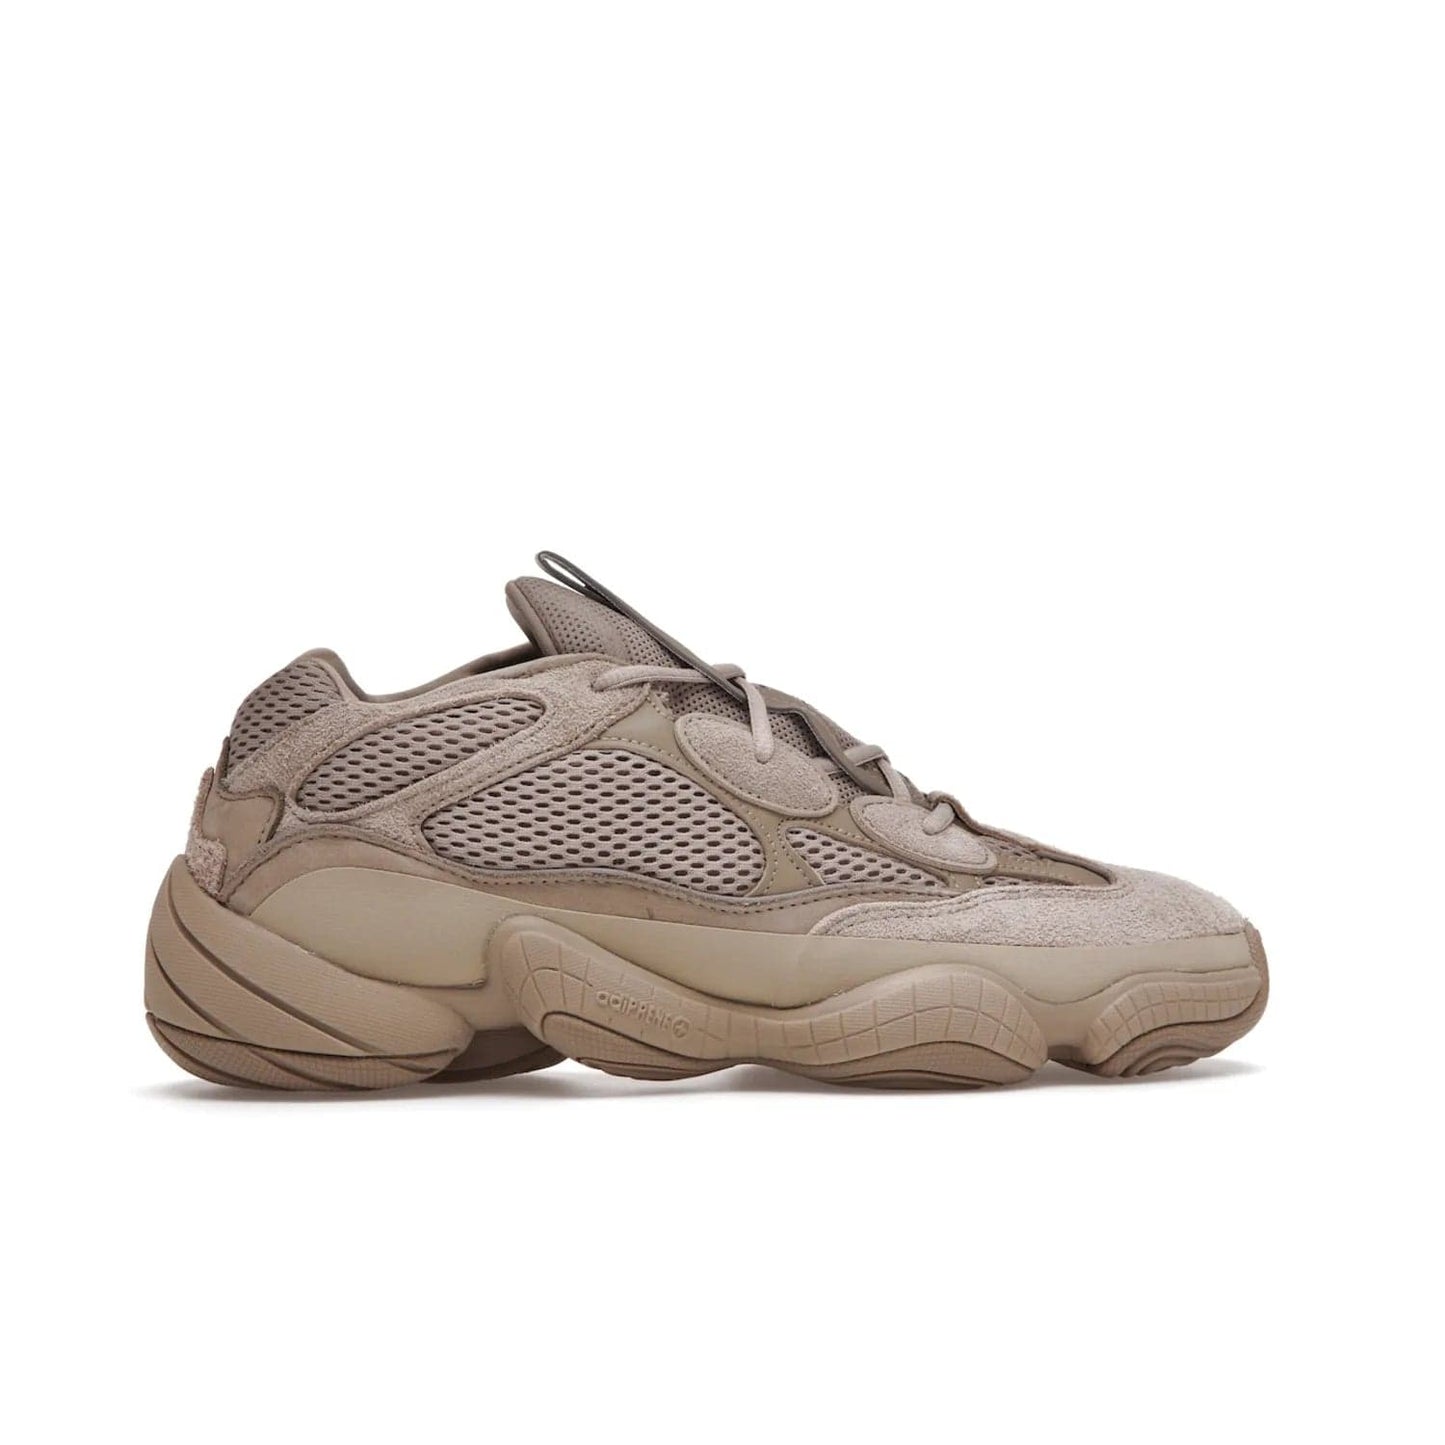 adidas Yeezy 500 Taupe Light - Image 36 - Only at www.BallersClubKickz.com - The adidas Yeezy 500 Taupe Light combines mesh, leather, and suede, with a durable adiPRENE sole for an eye-catching accessory. Reflective piping adds the perfect finishing touches to this unique silhouette. Ideal for any wardrobe, releasing in June 2021.